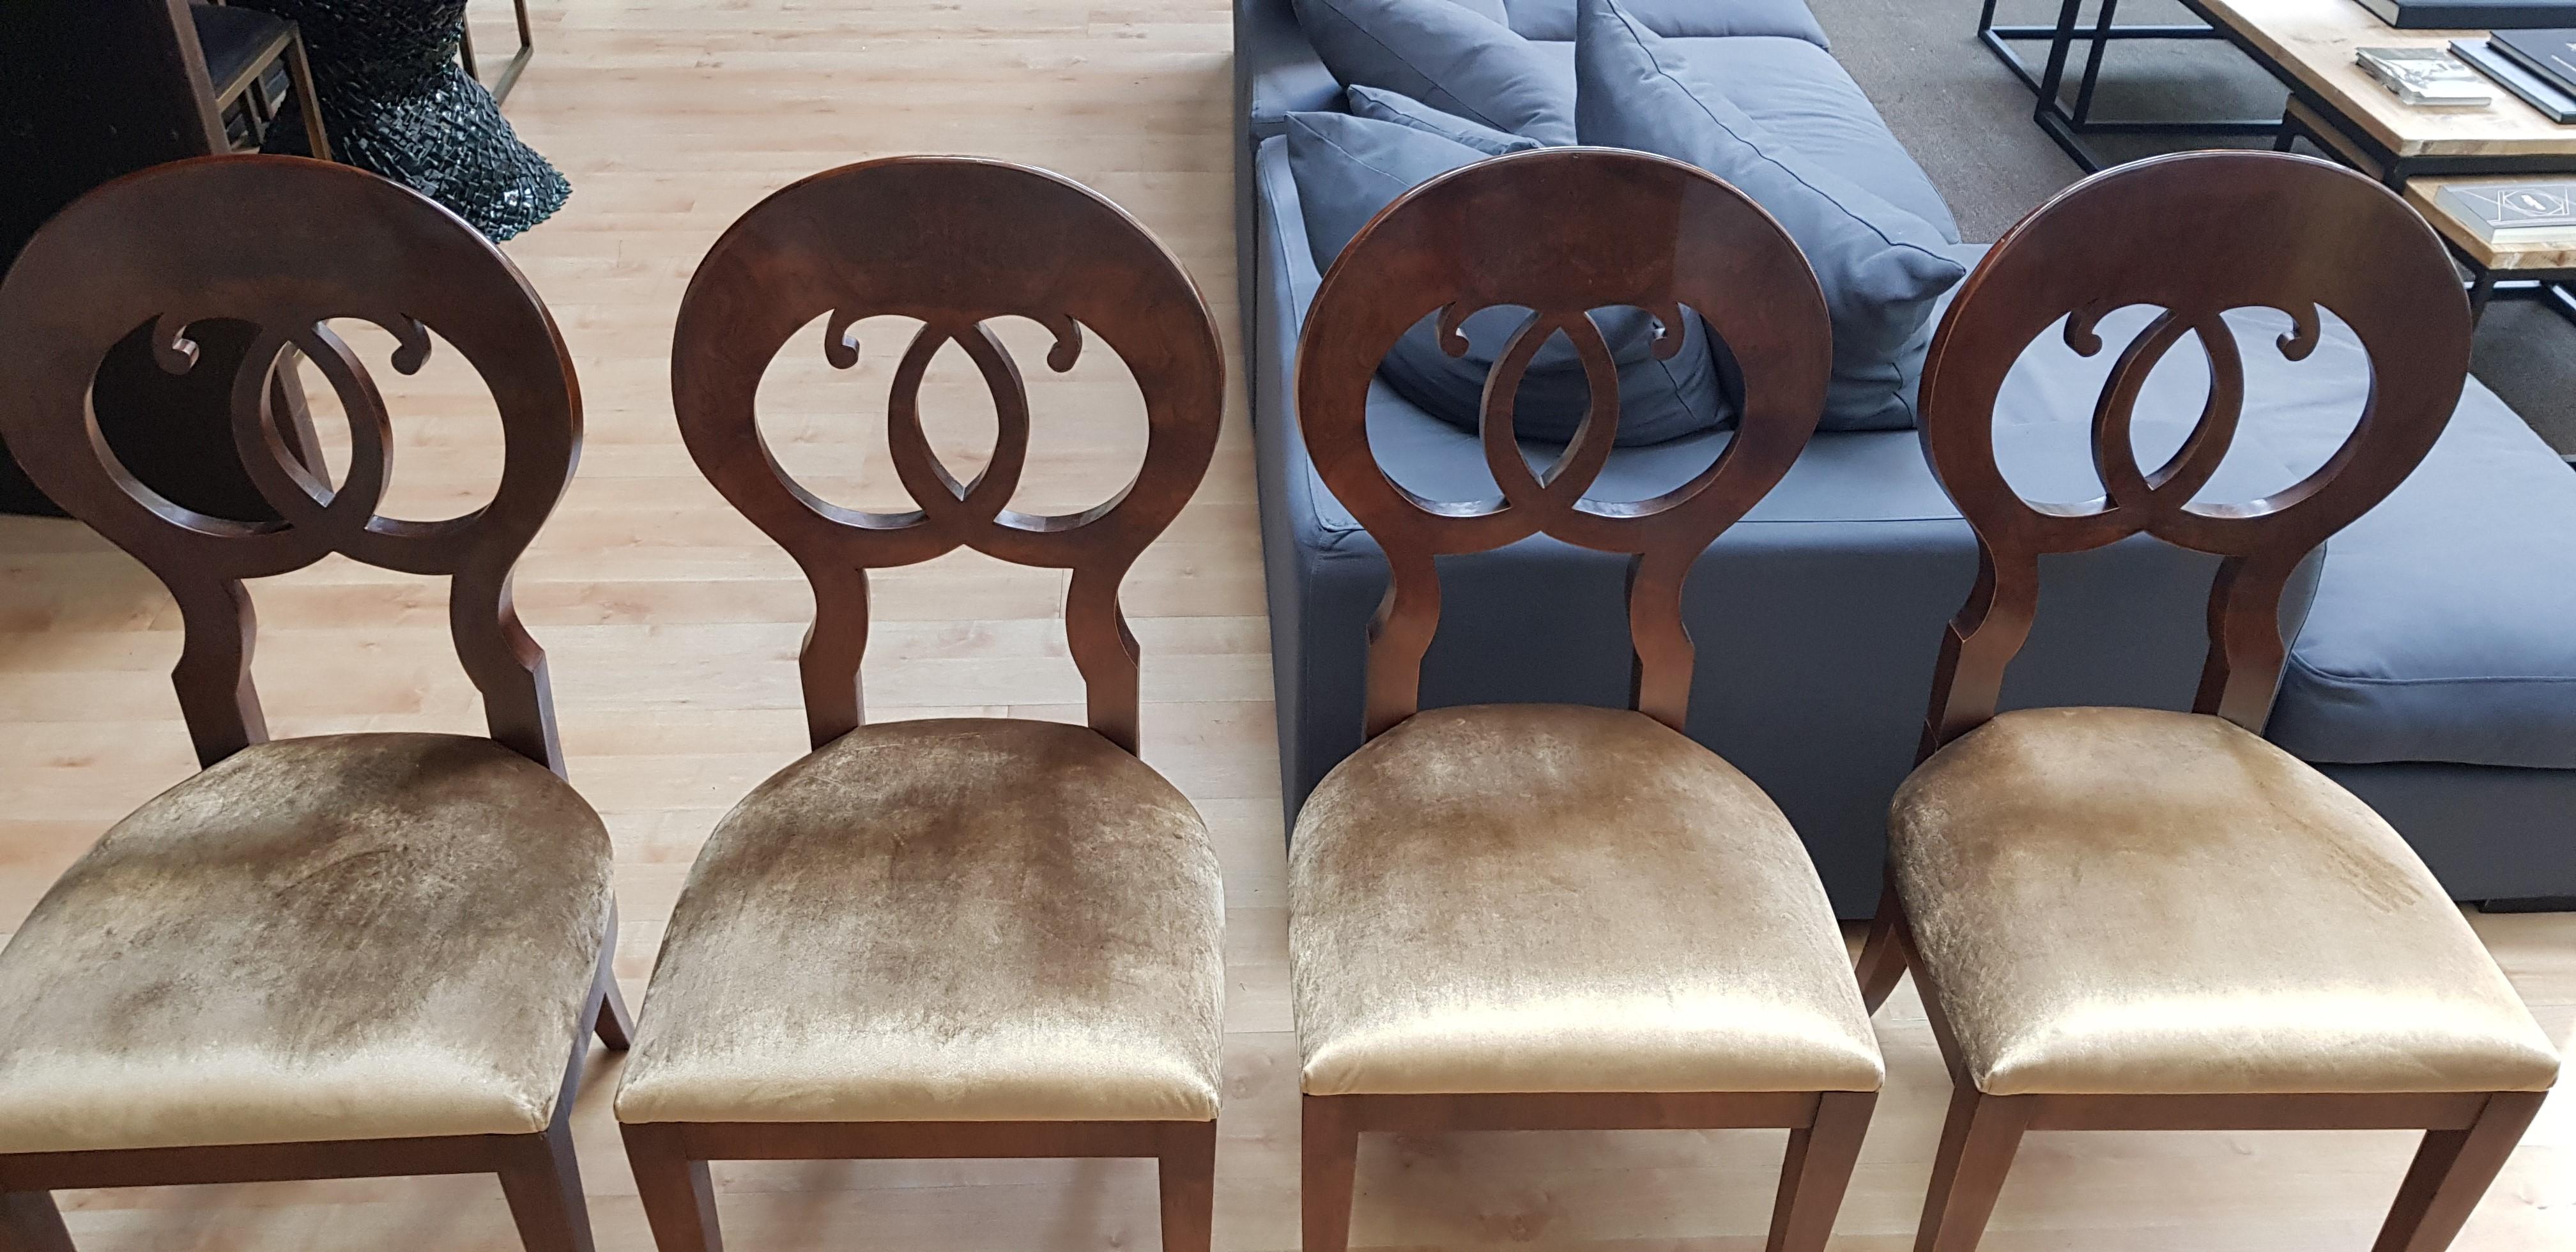 Set of four Biedermeier seats in solid walnut wood, delicately crafted with a back veneering in walnut wood and a front veneering in briarwood. The foam rubber padding is in non-deformable t35 (high density of robustness) and is supported by steel